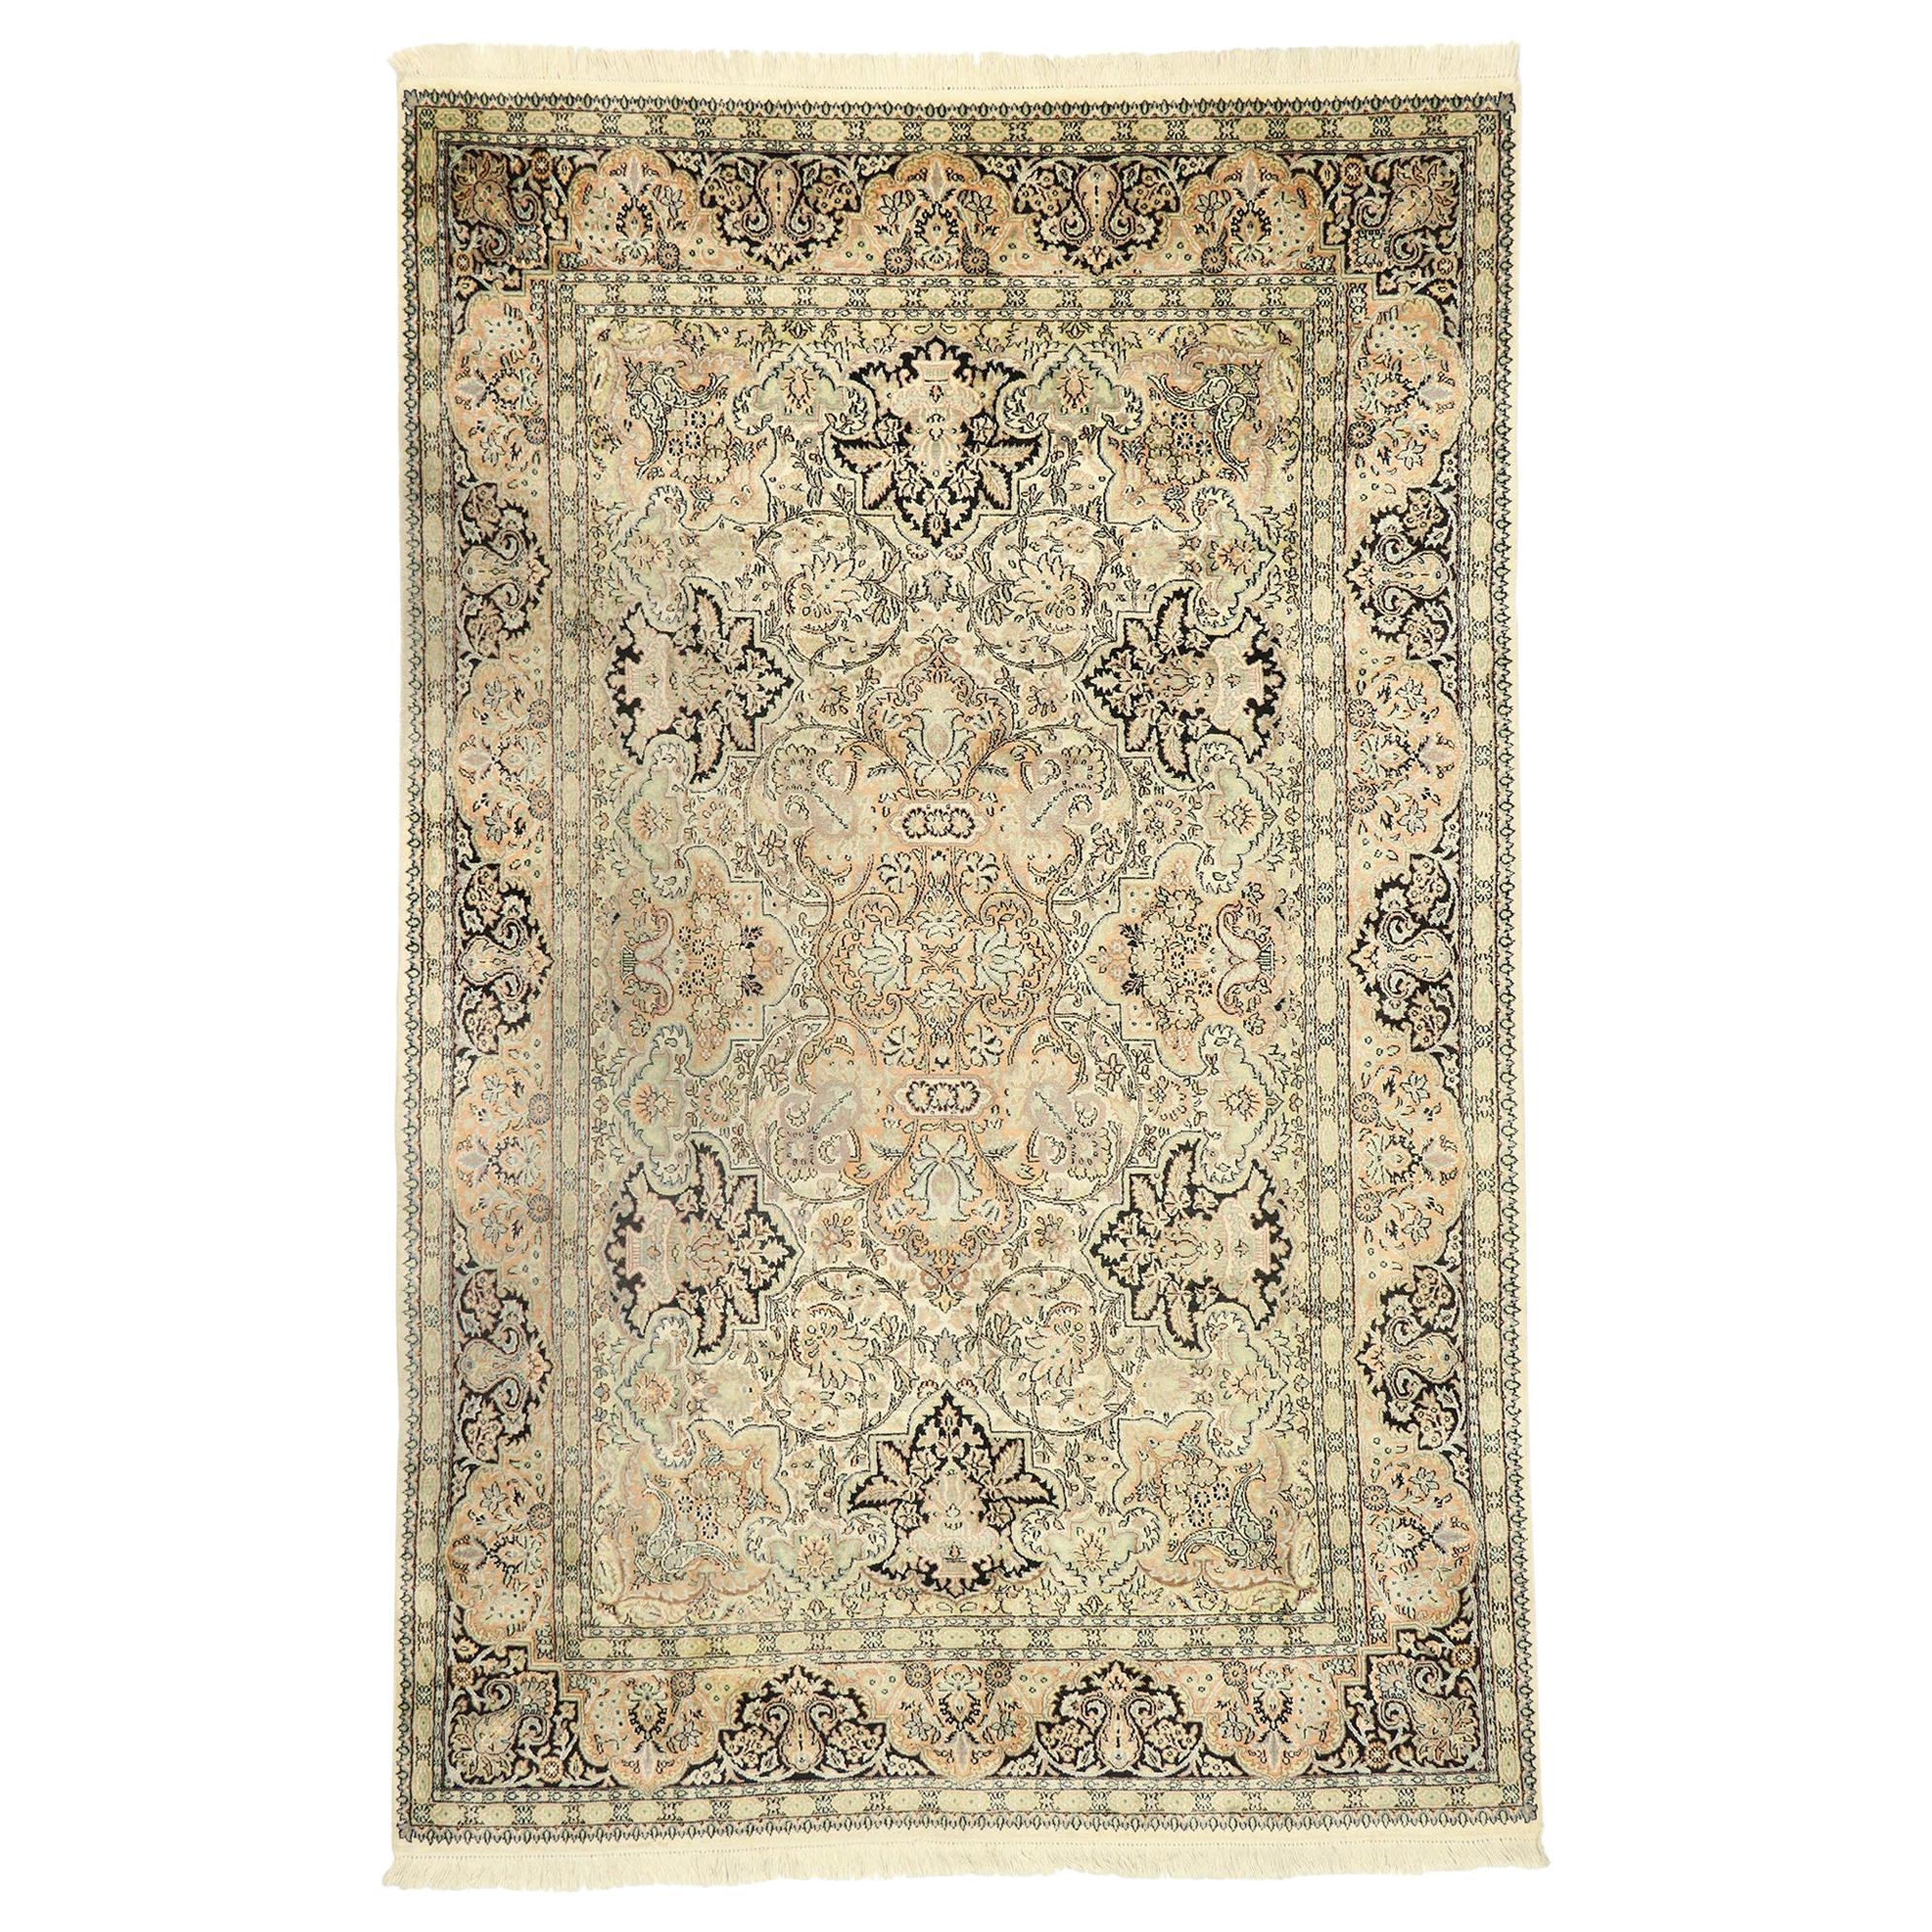 How much does a silk rug cost?